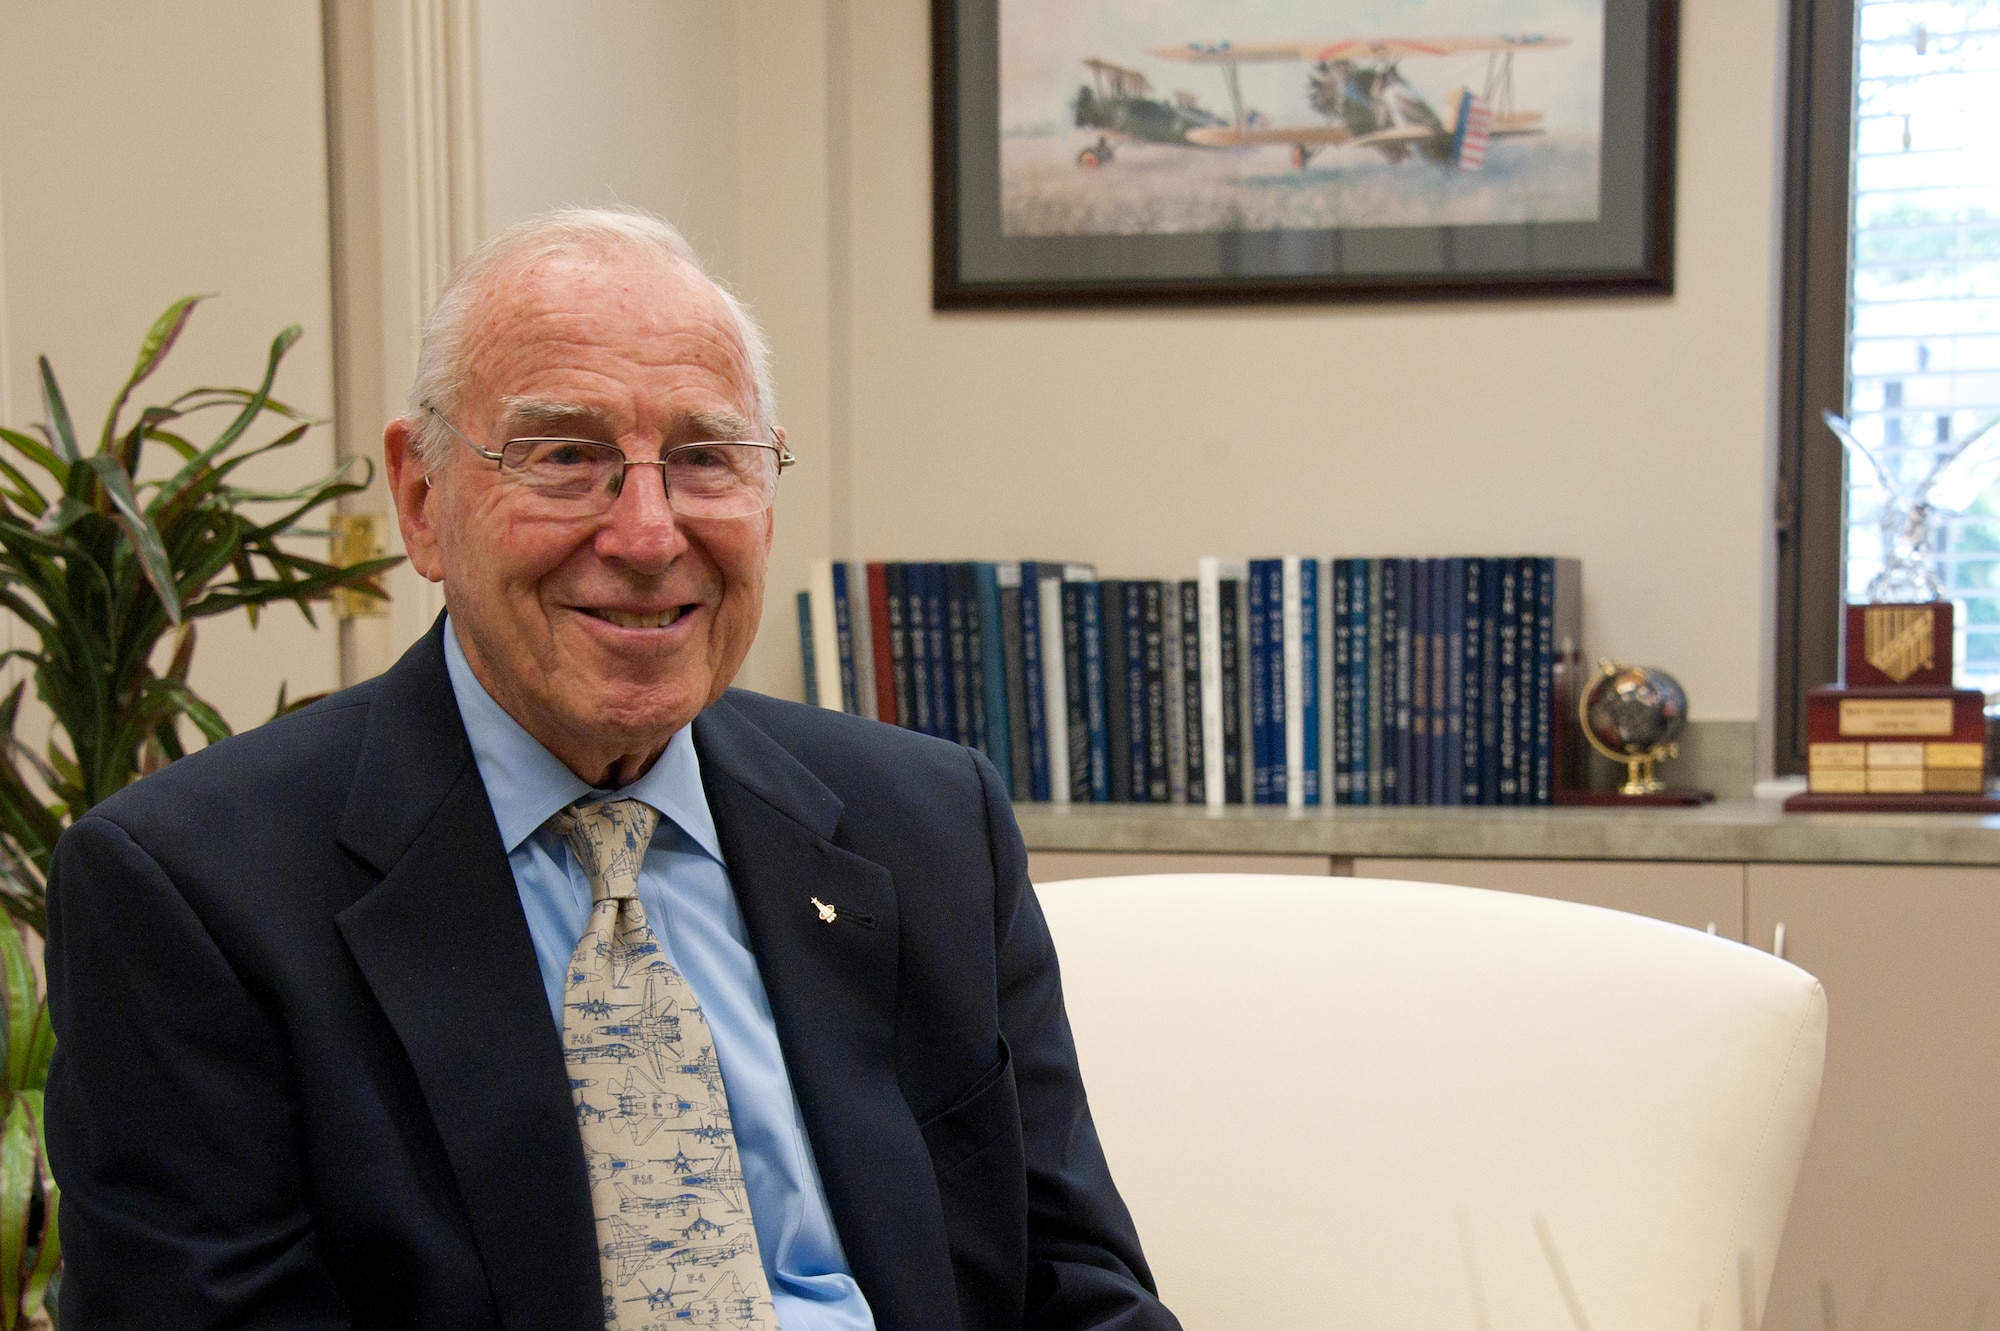 Apollo 13 Capt. Jim Lovell shares his experiences aboard the infamous spacecraft
during a visit to Maxwell Aug. 24. He met with Air War College and Air
Command and Staff College students to discuss leadership in the face of challenges.